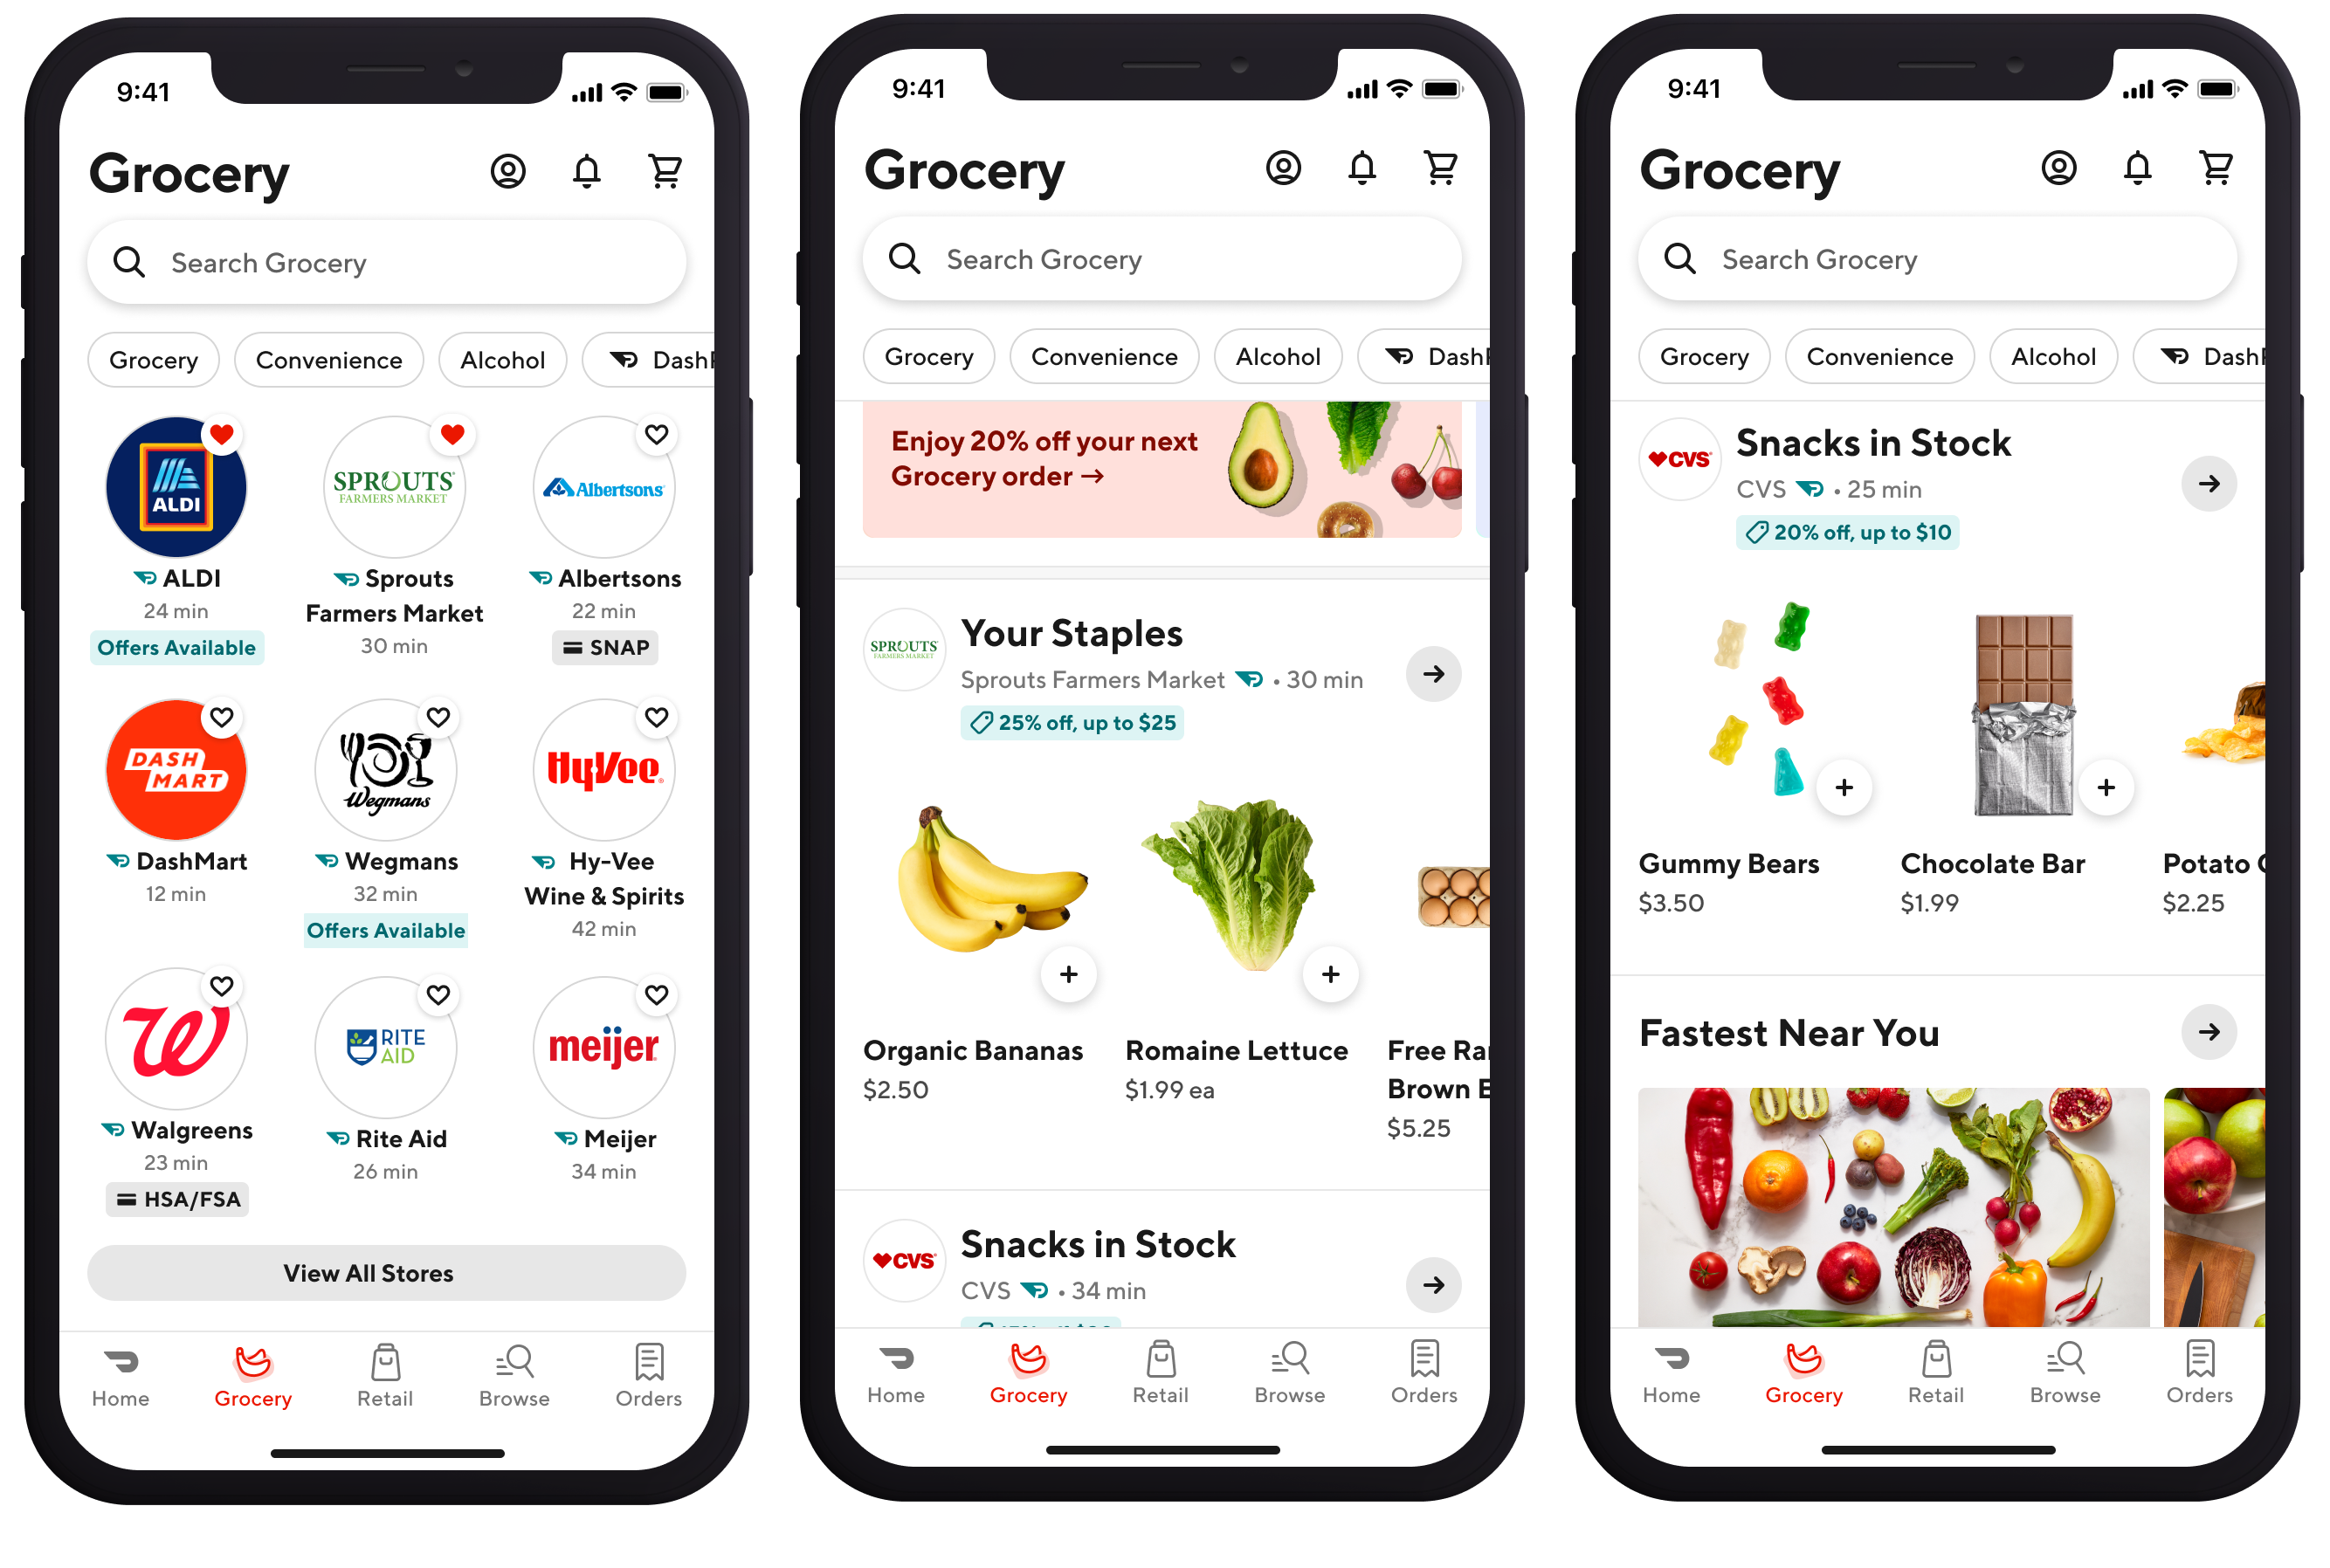 Sceenshots of the grocery tab in the updated DoorDash app, showing users how they can order grocery items.